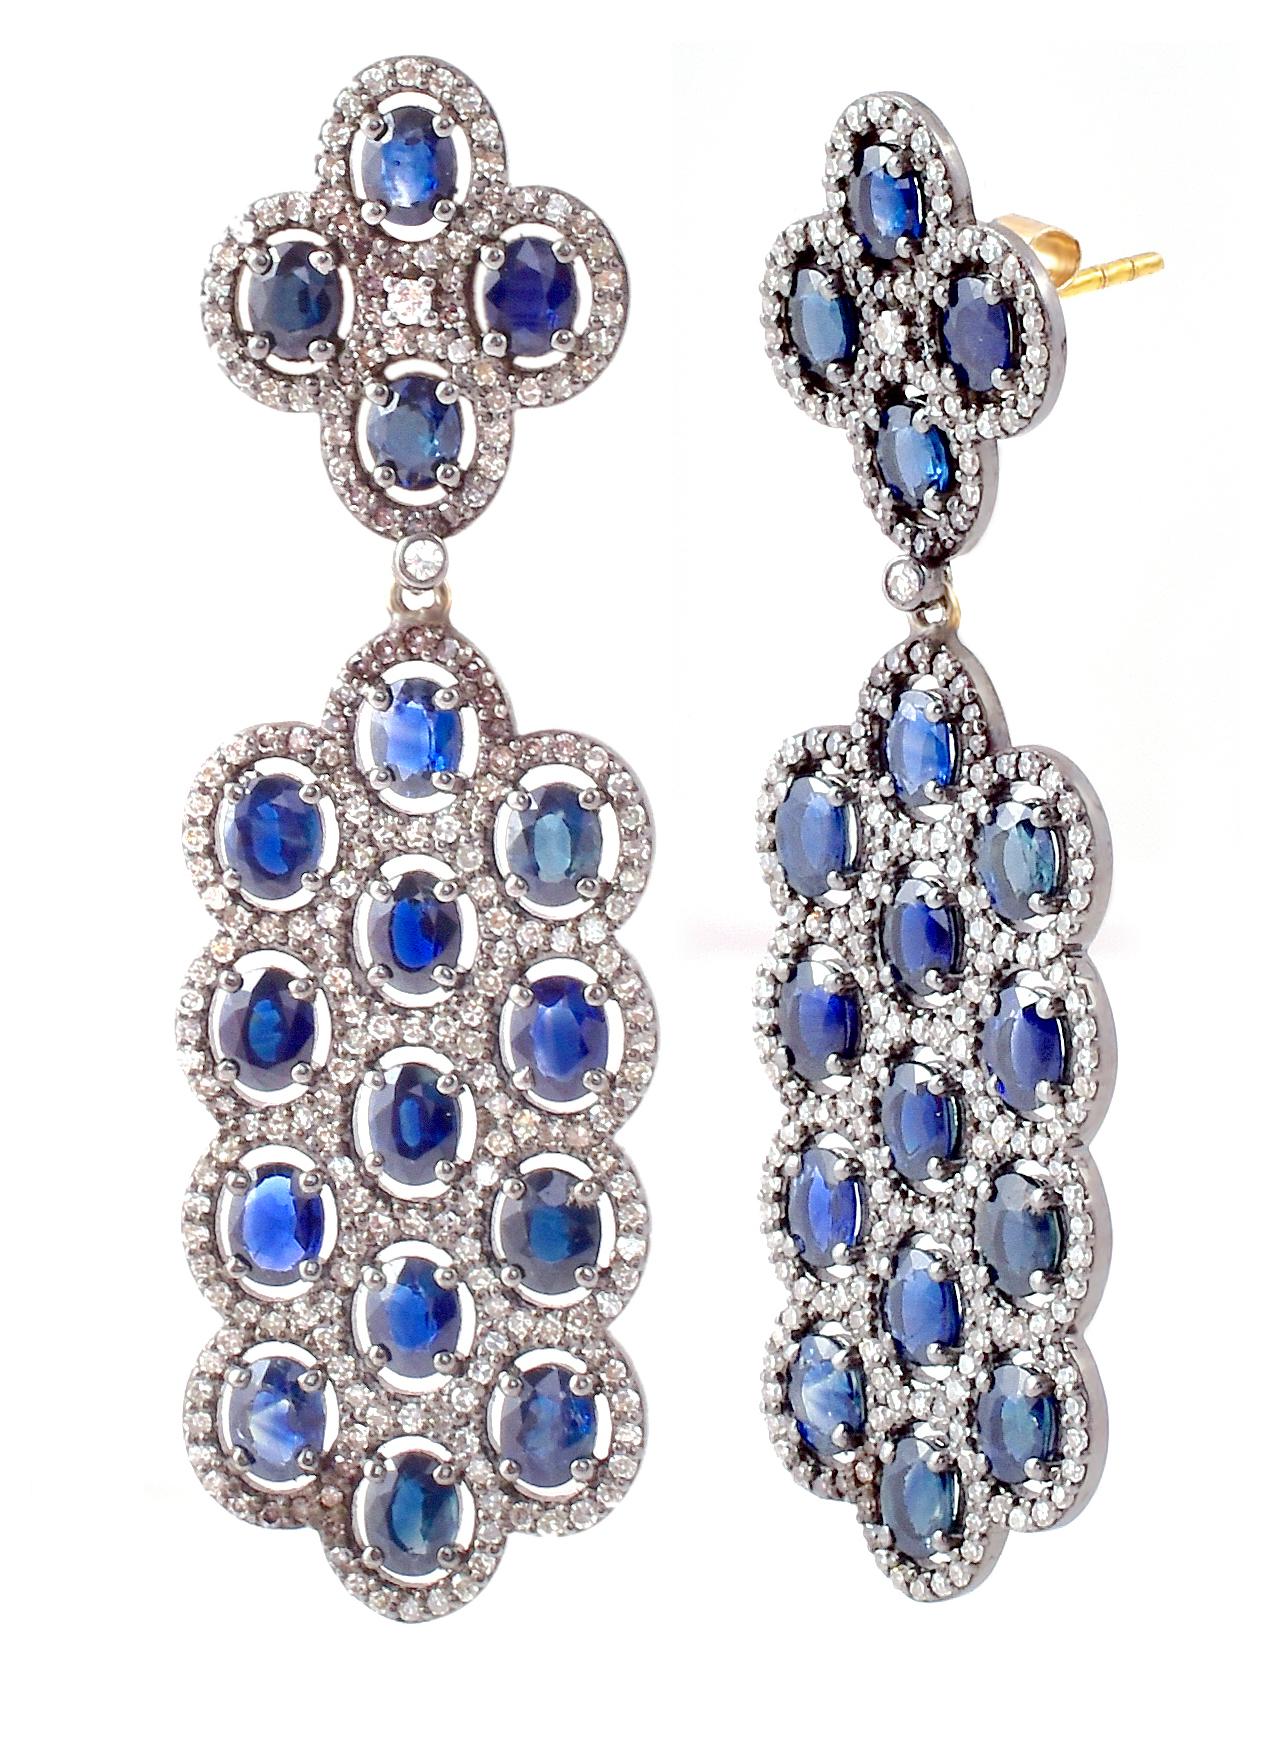 9.94 Carats Oval-Cut Blue Sapphires and Diamond Cluster Drop Earrings

This Victorian-era art-deco style elegant oxford blue sapphire and diamond cluster long hanging earring is spectacular. The three rows of matching oval blue sapphires are covered